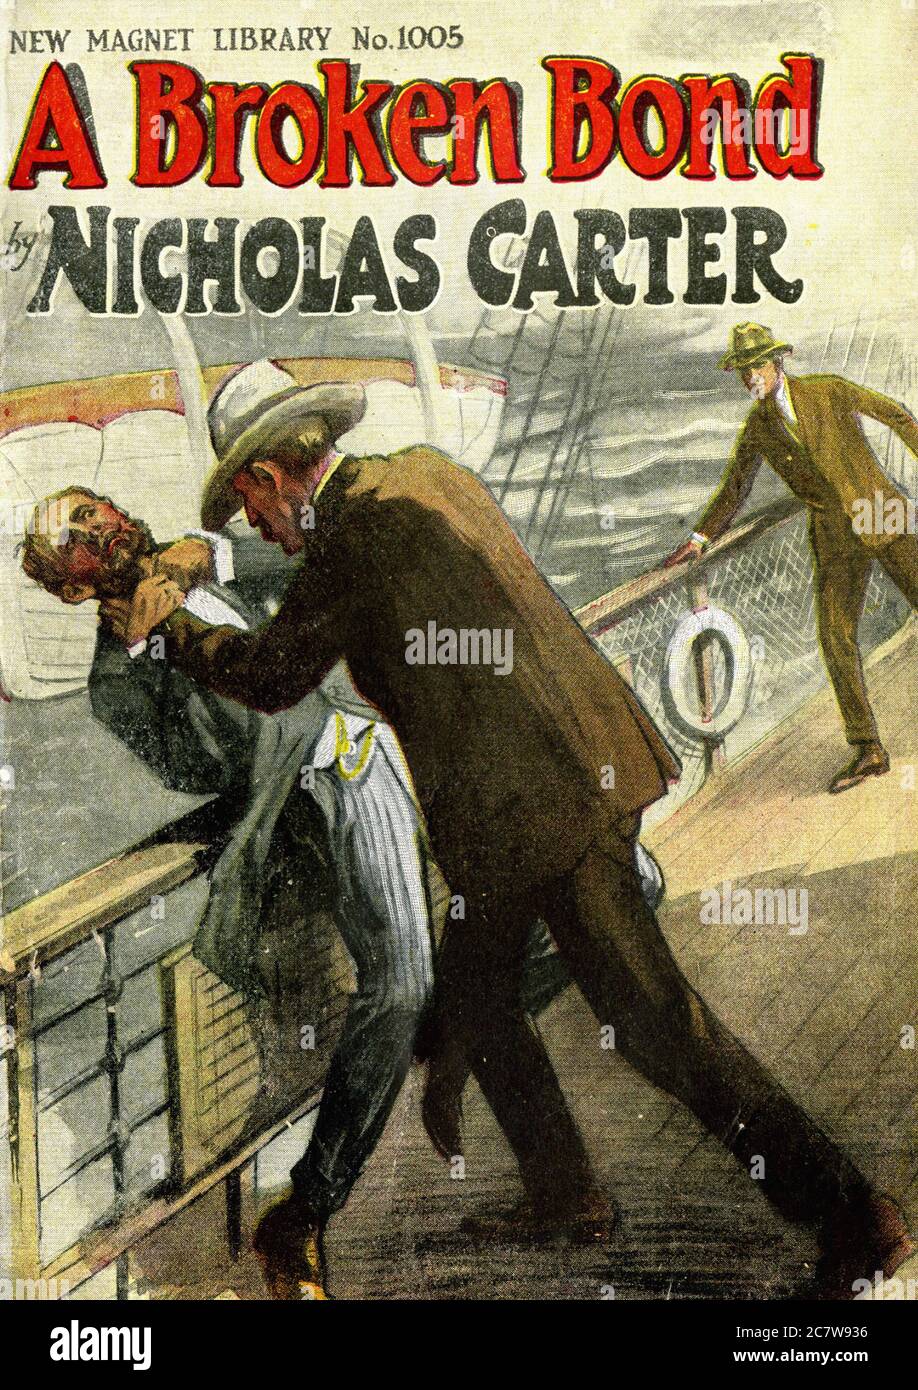 Nicholas Carter - A Broken Bond   or, The man without morals - New Magnet Library - Vintage Pulp Literary Stock Photo